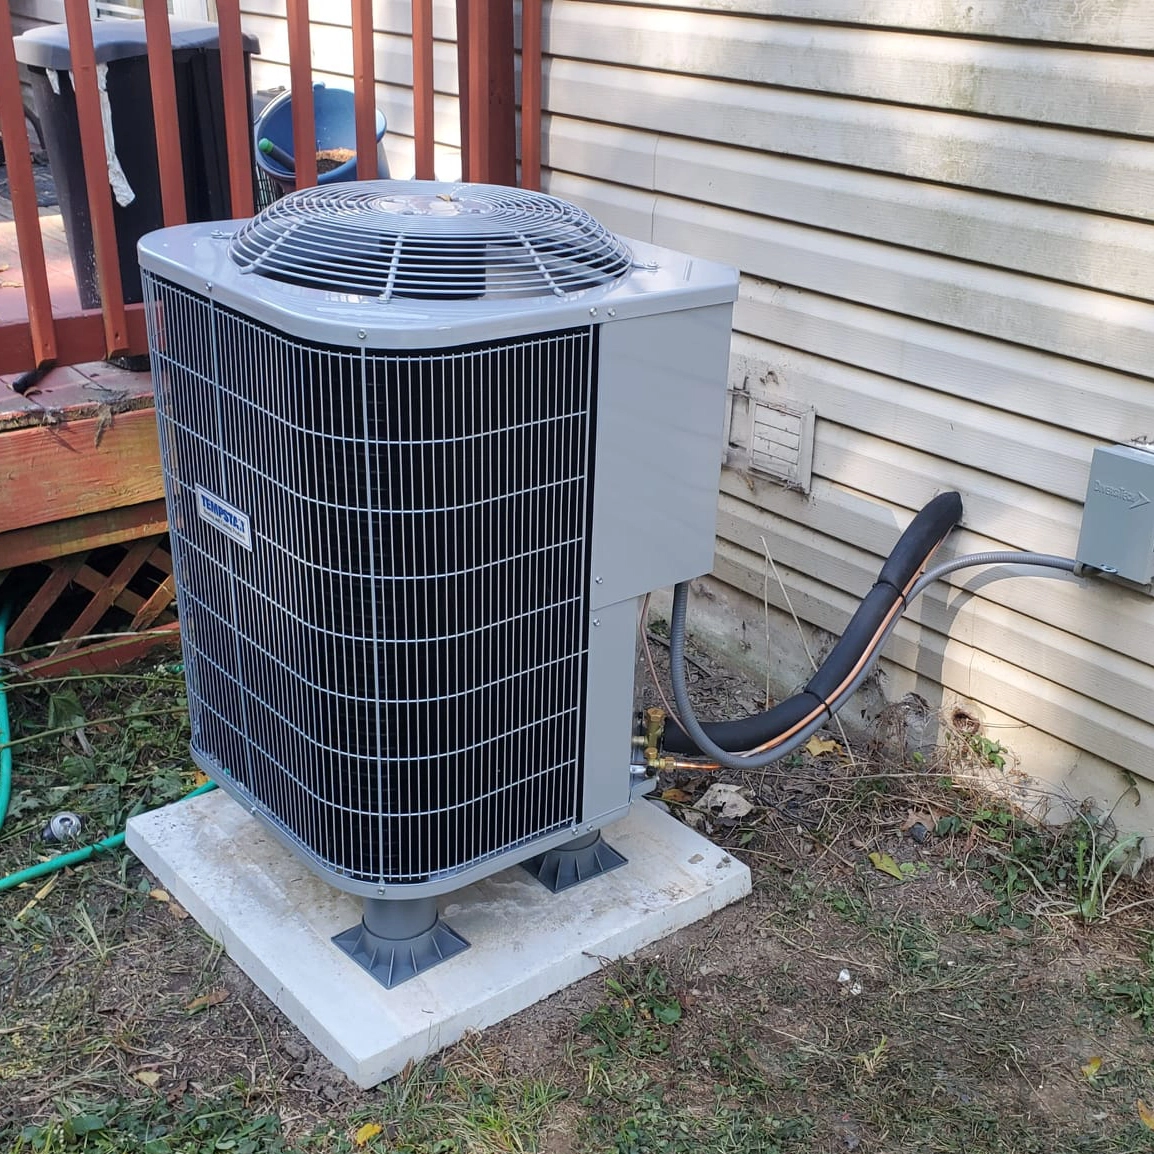 Find out ways to save energy and money with Peak Heating and Air Heat Pump repair service in Cincinnati OH